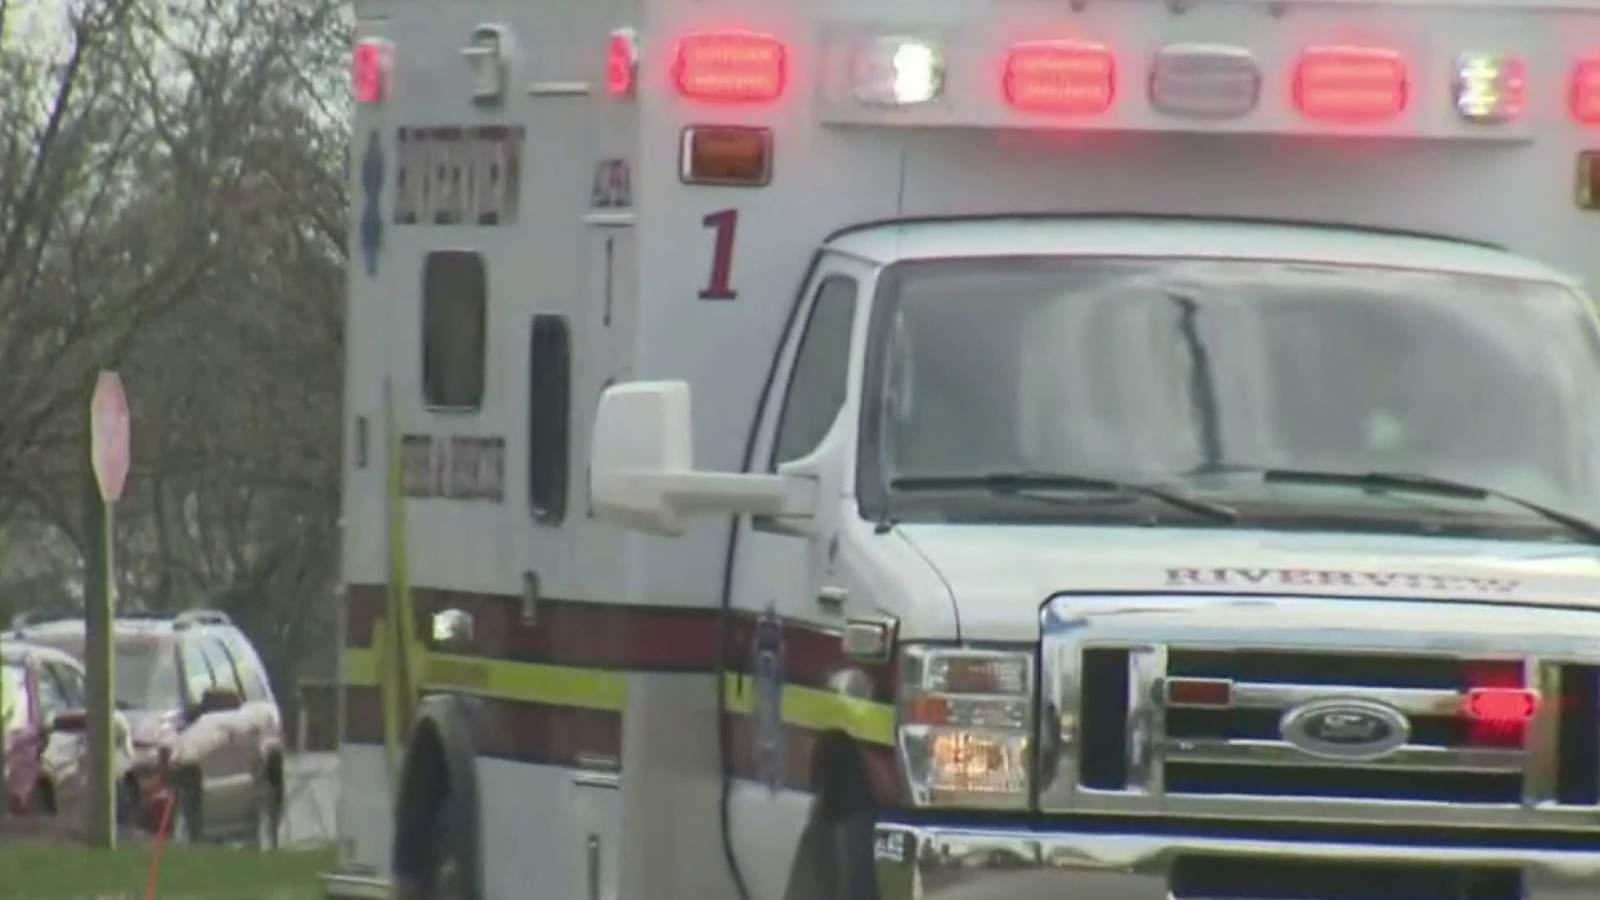 ‘It’s not safe there’ -- COVID-19 outbreak reported at Downriver nursing home